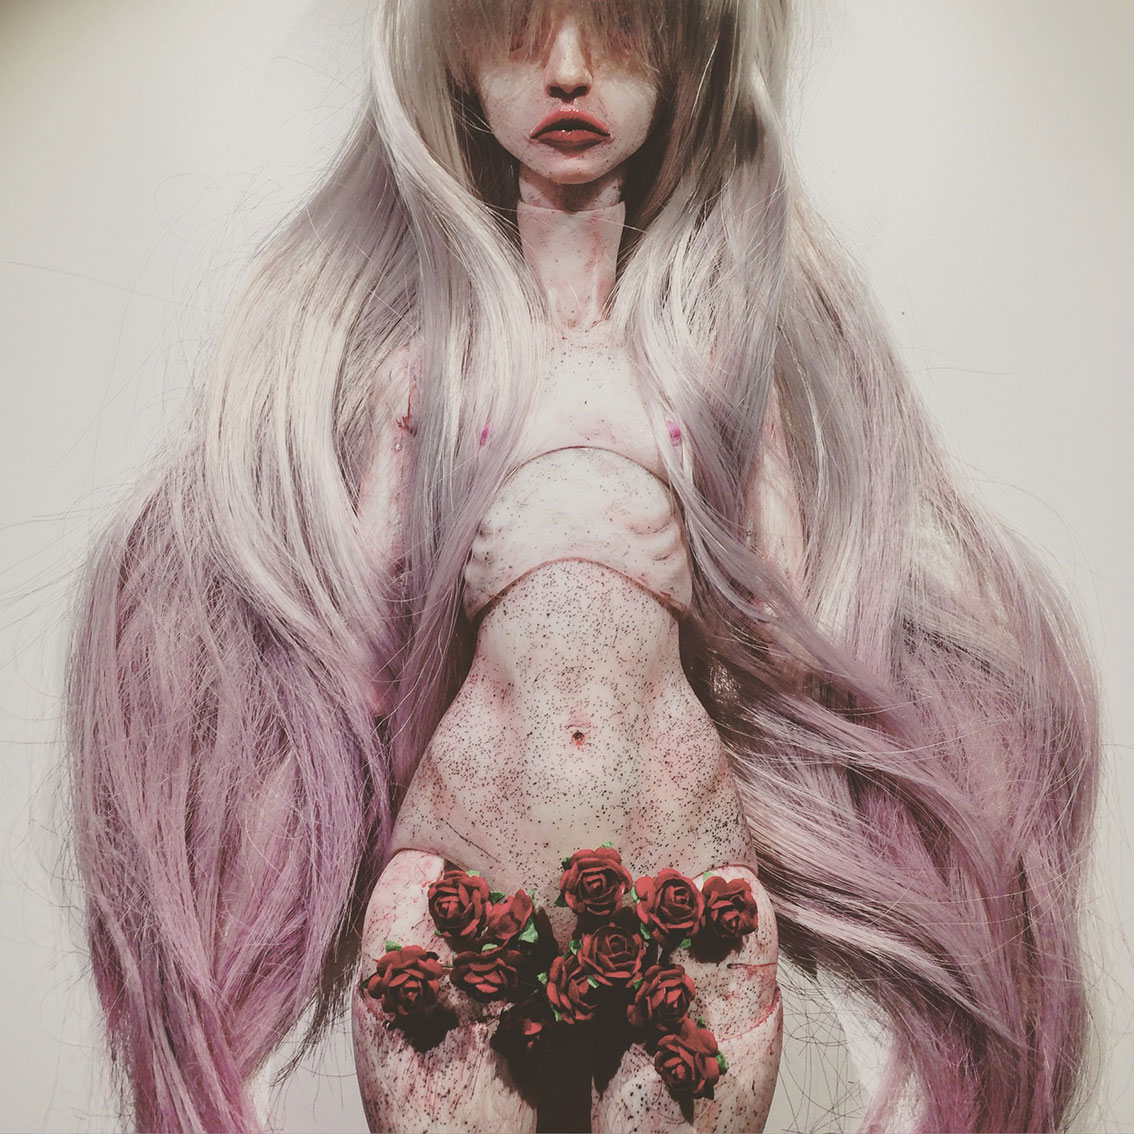 Emilie Steele Art doll’s – From my rotting body, flowers shall grow and I am in them and that is eternity